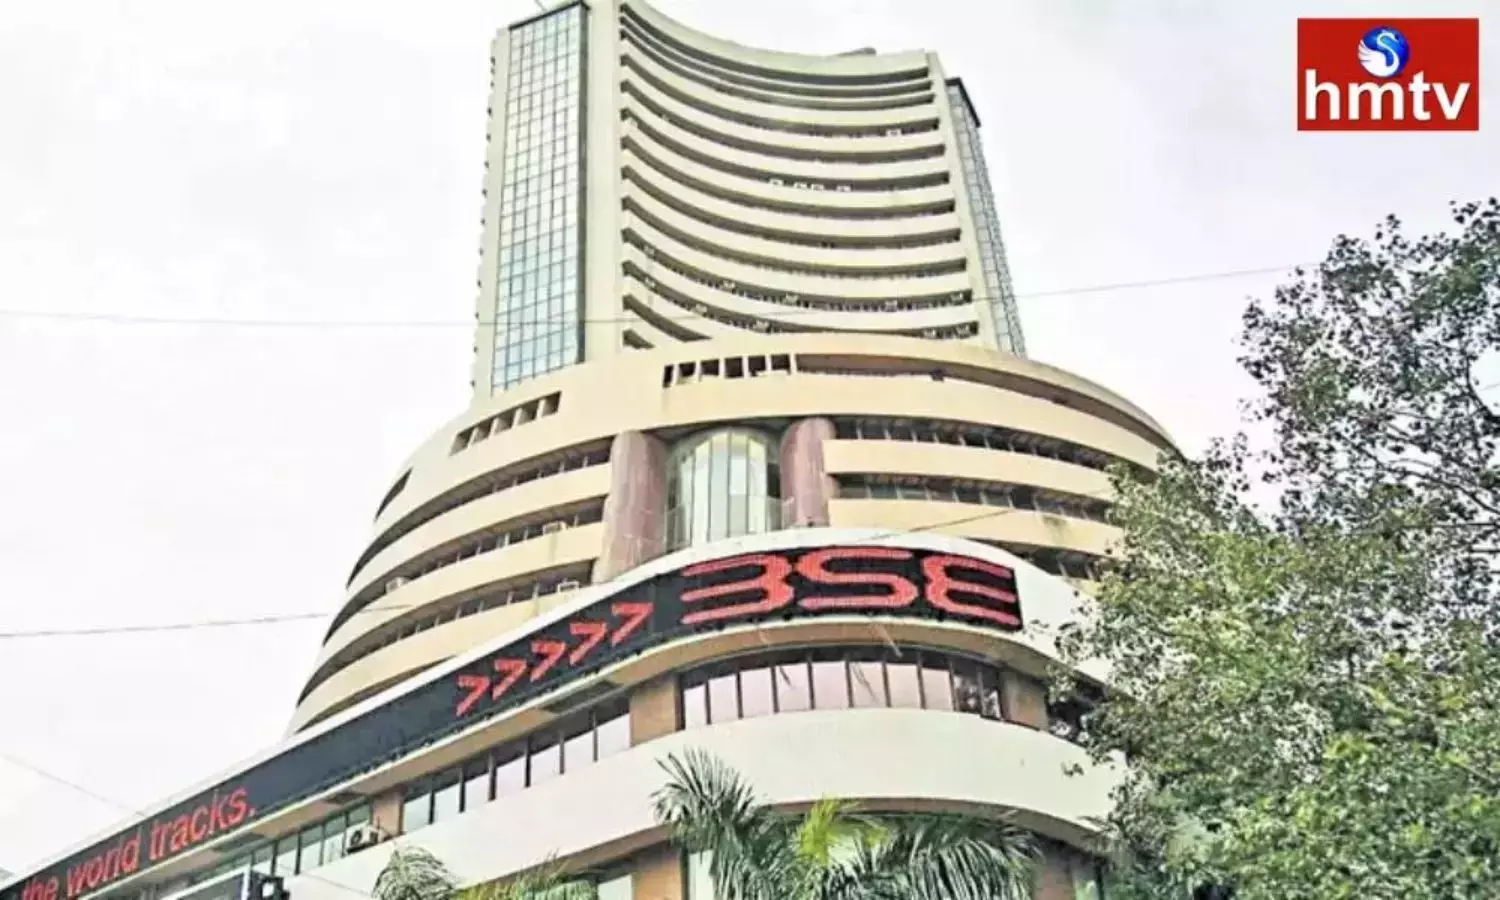 Stock Market Today Sensex Gains Over 685 Points, Nifty 171 Settles Above 17186 at Close